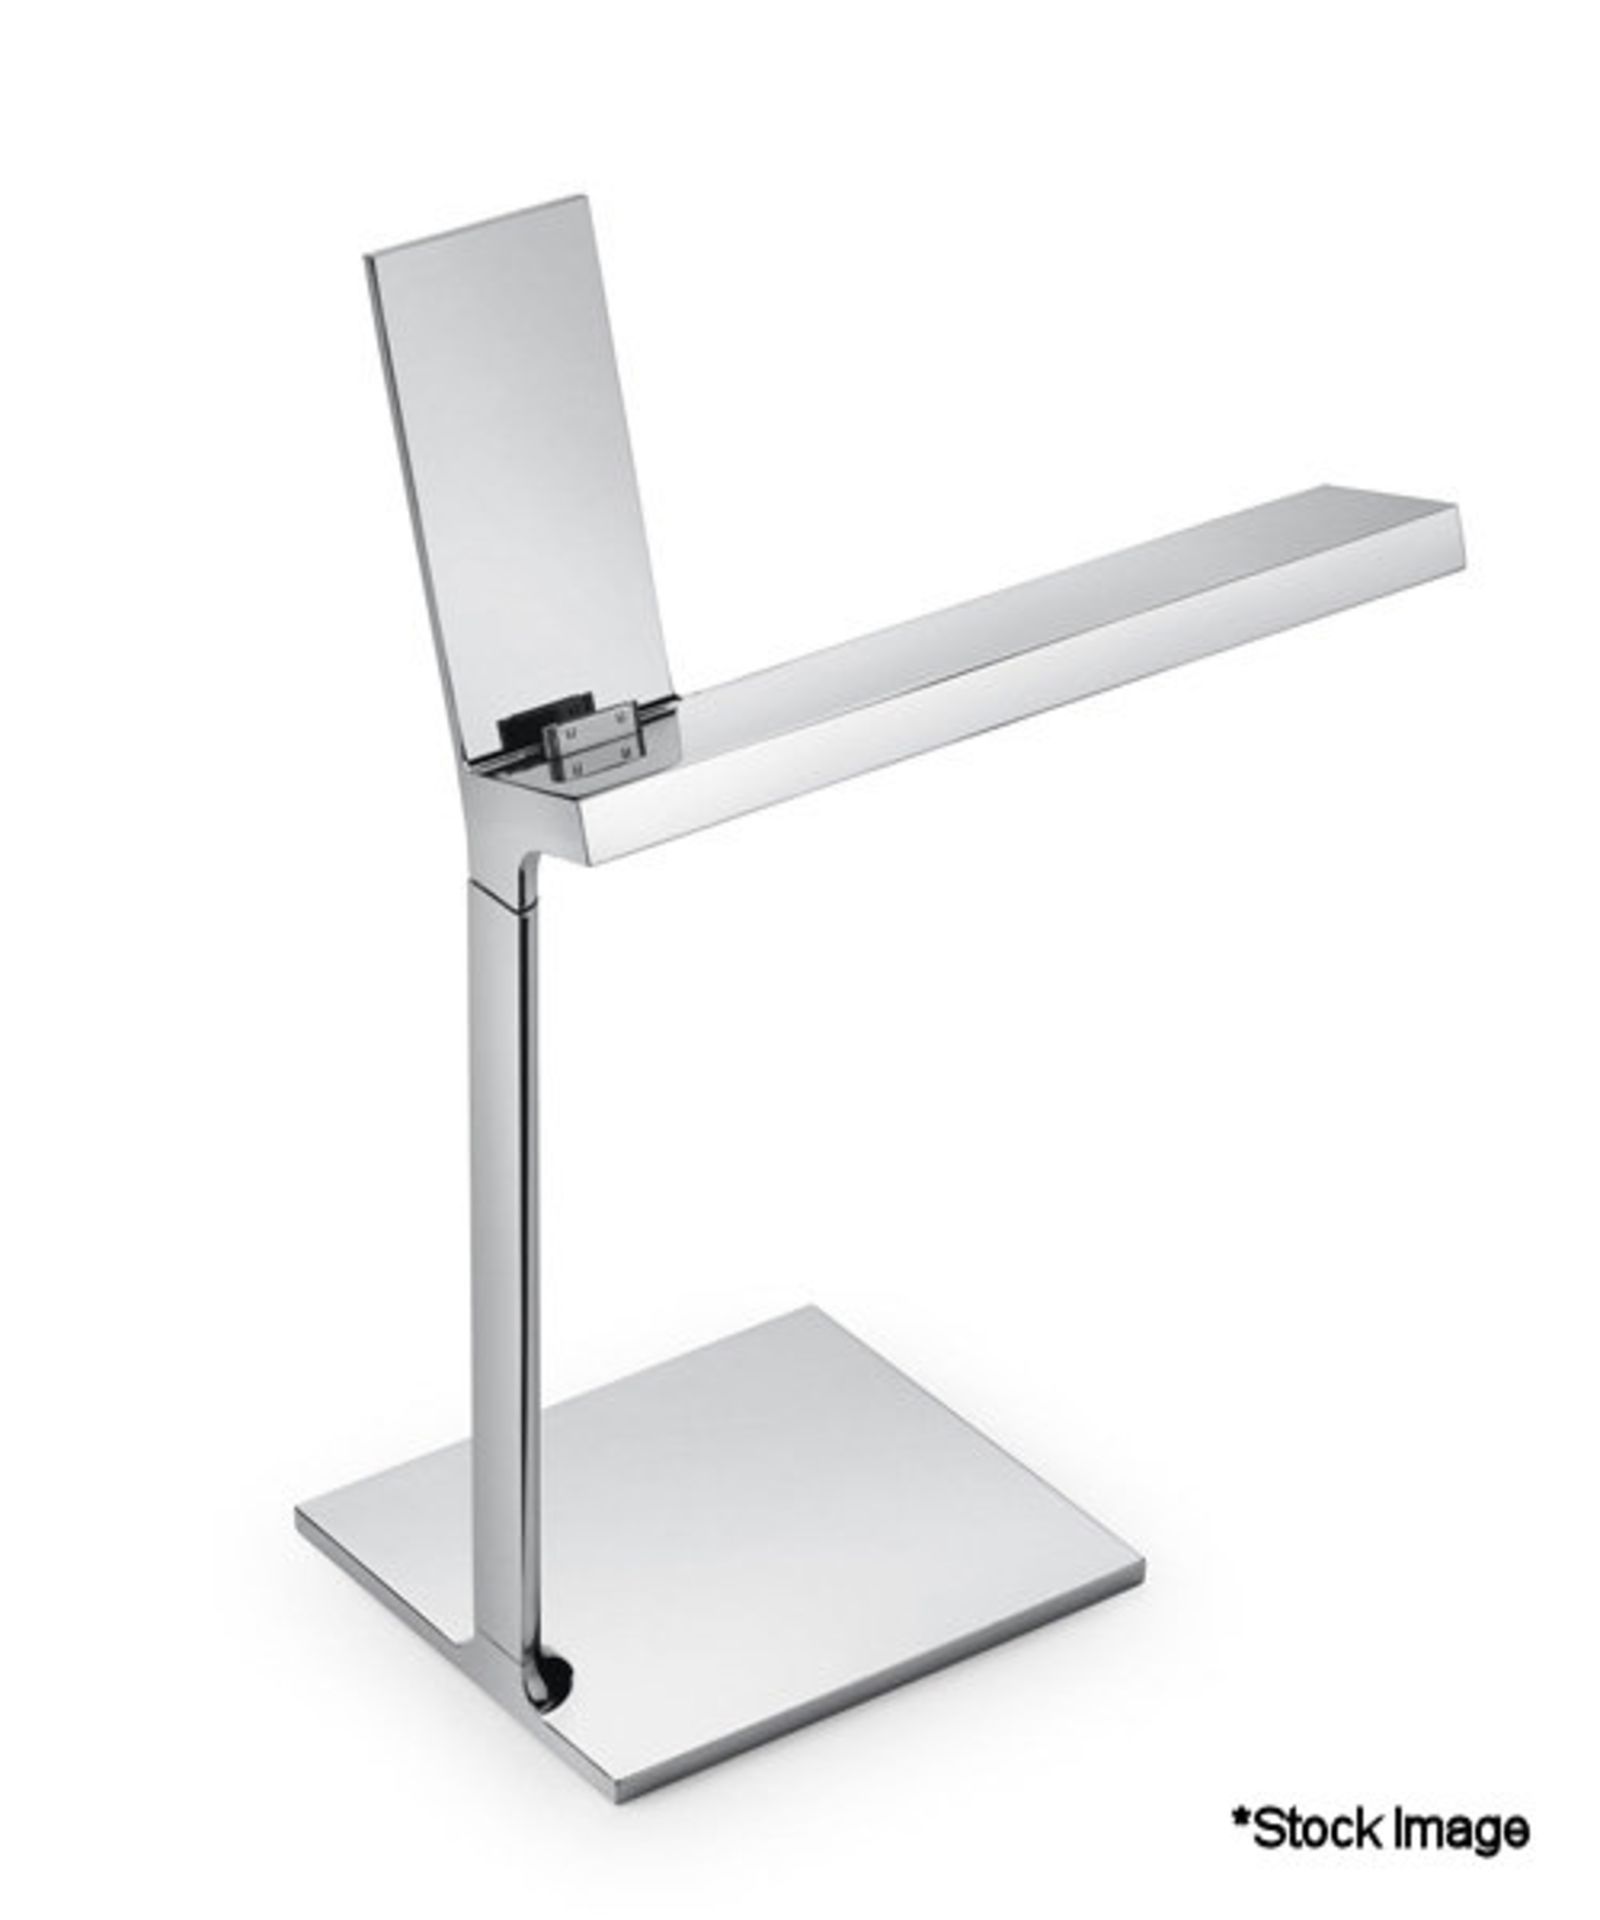 4 x FLOS D'E-Light Led Task Lamp With Ipad Charging Dock 30-Pin - Designed By Starck - Chrome